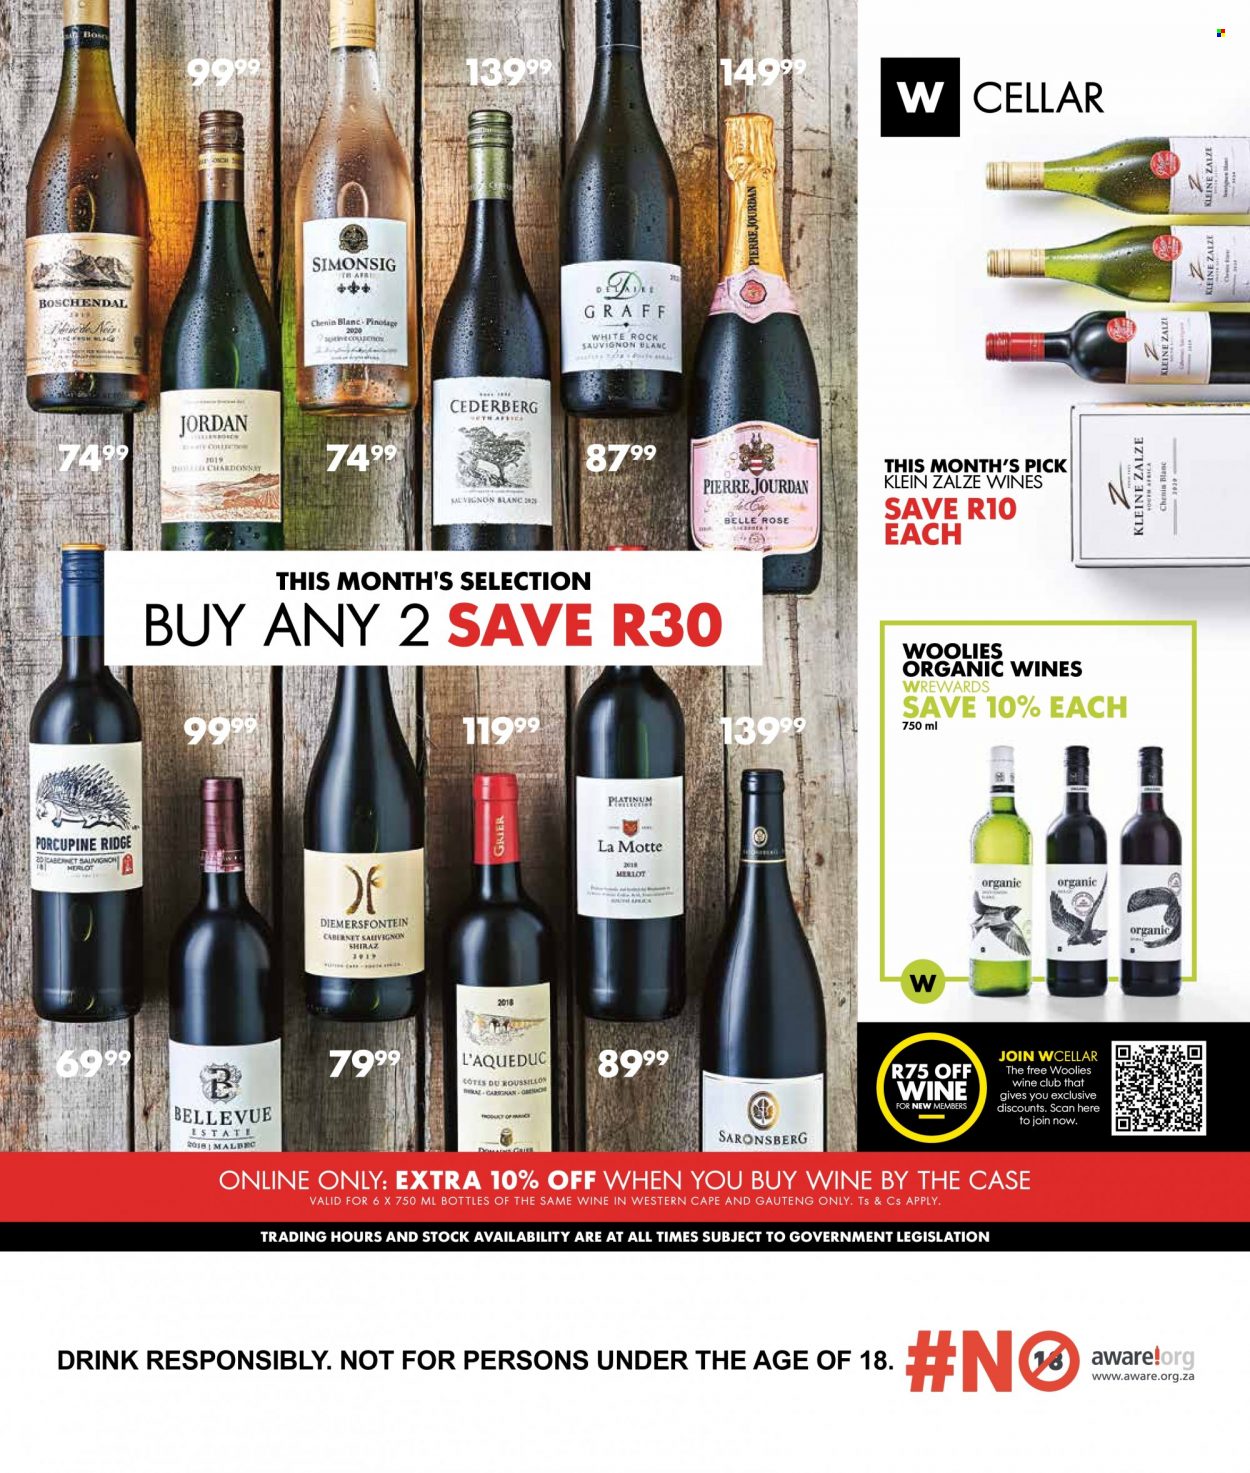 Woolworths specials - 09.20.2021 - 10.03.2021. 